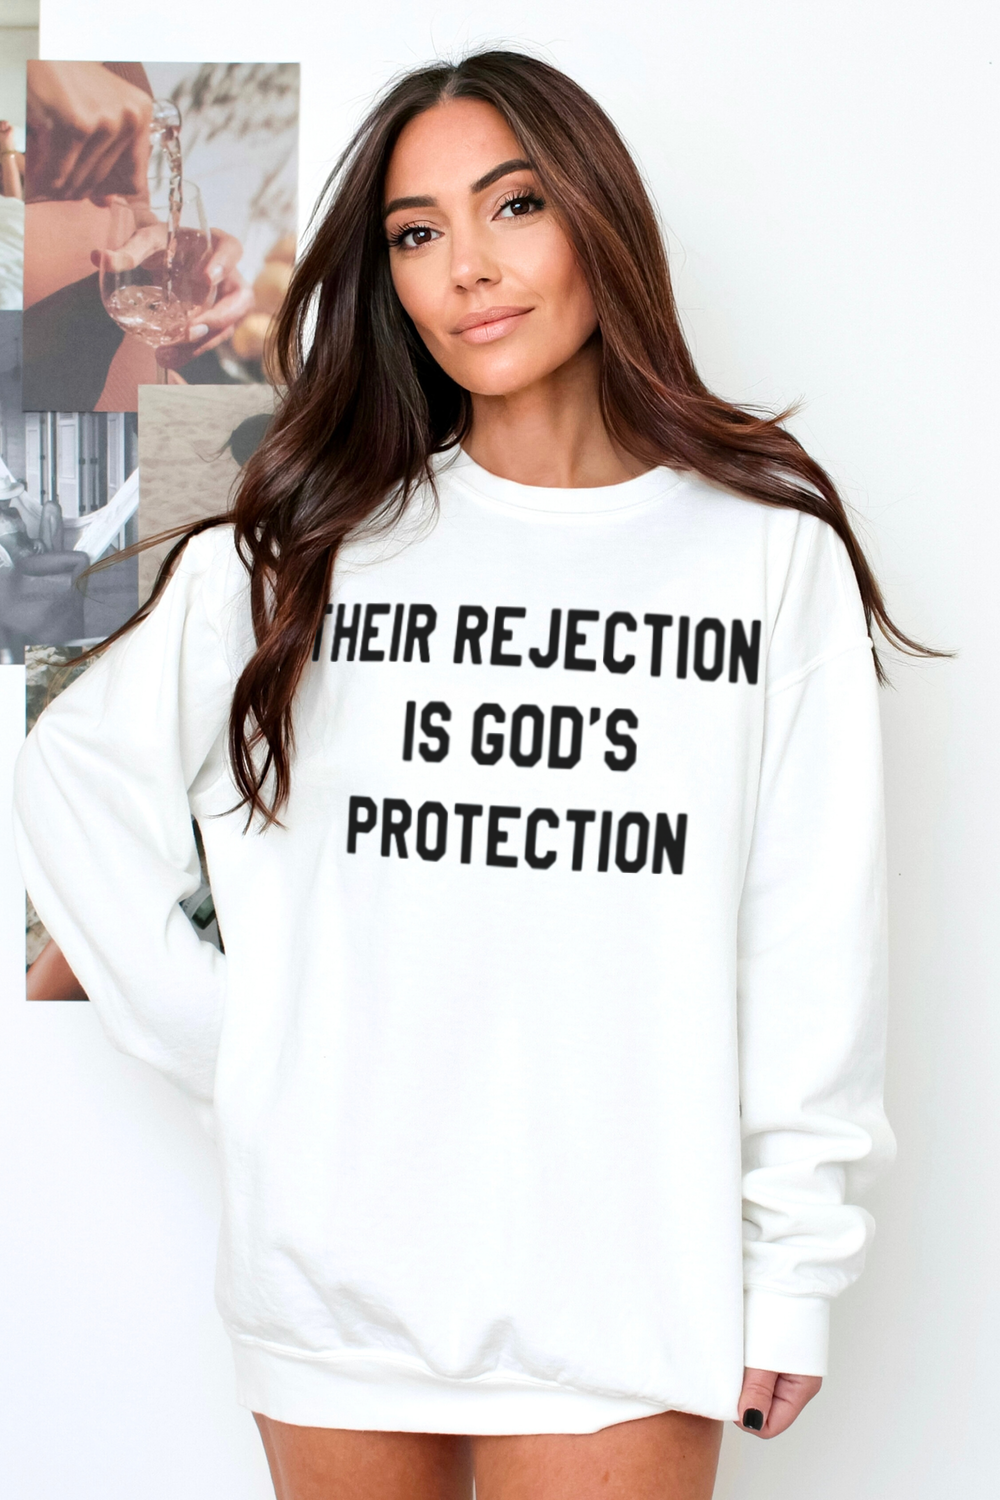 Their Rejection Is God's Protection Women's White Crewneck Sweatshirt